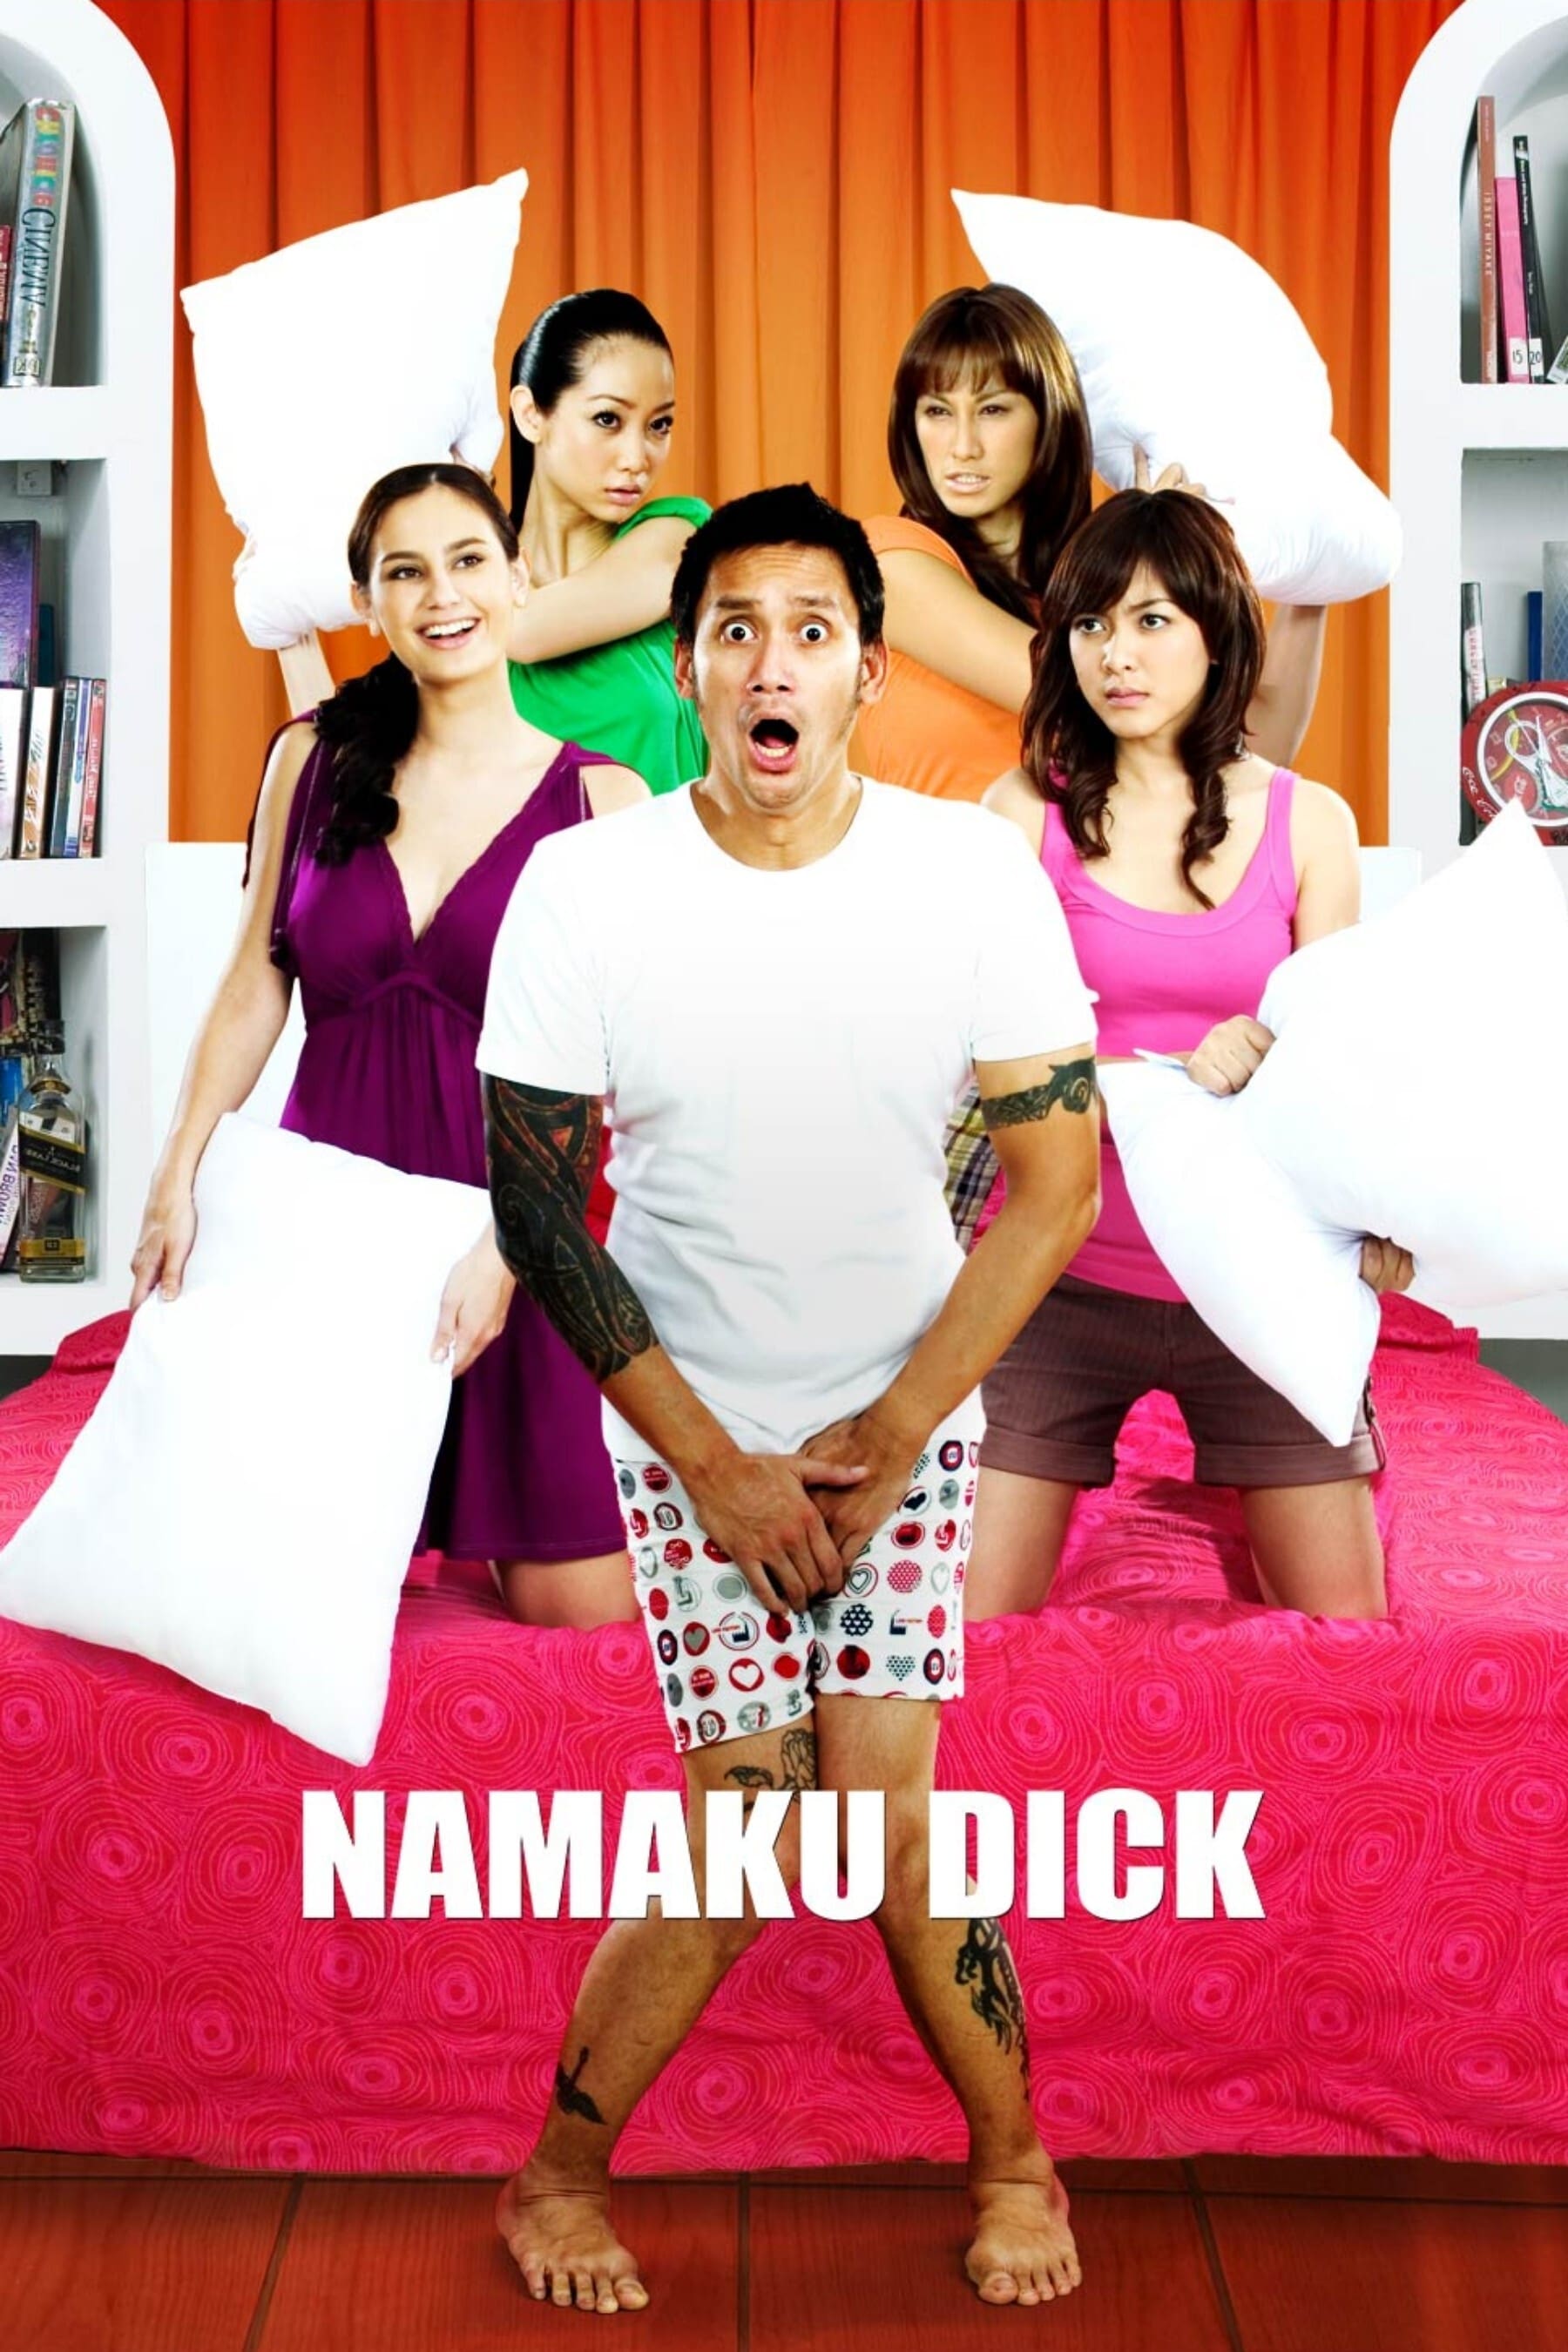 My Name is Dick (2008)